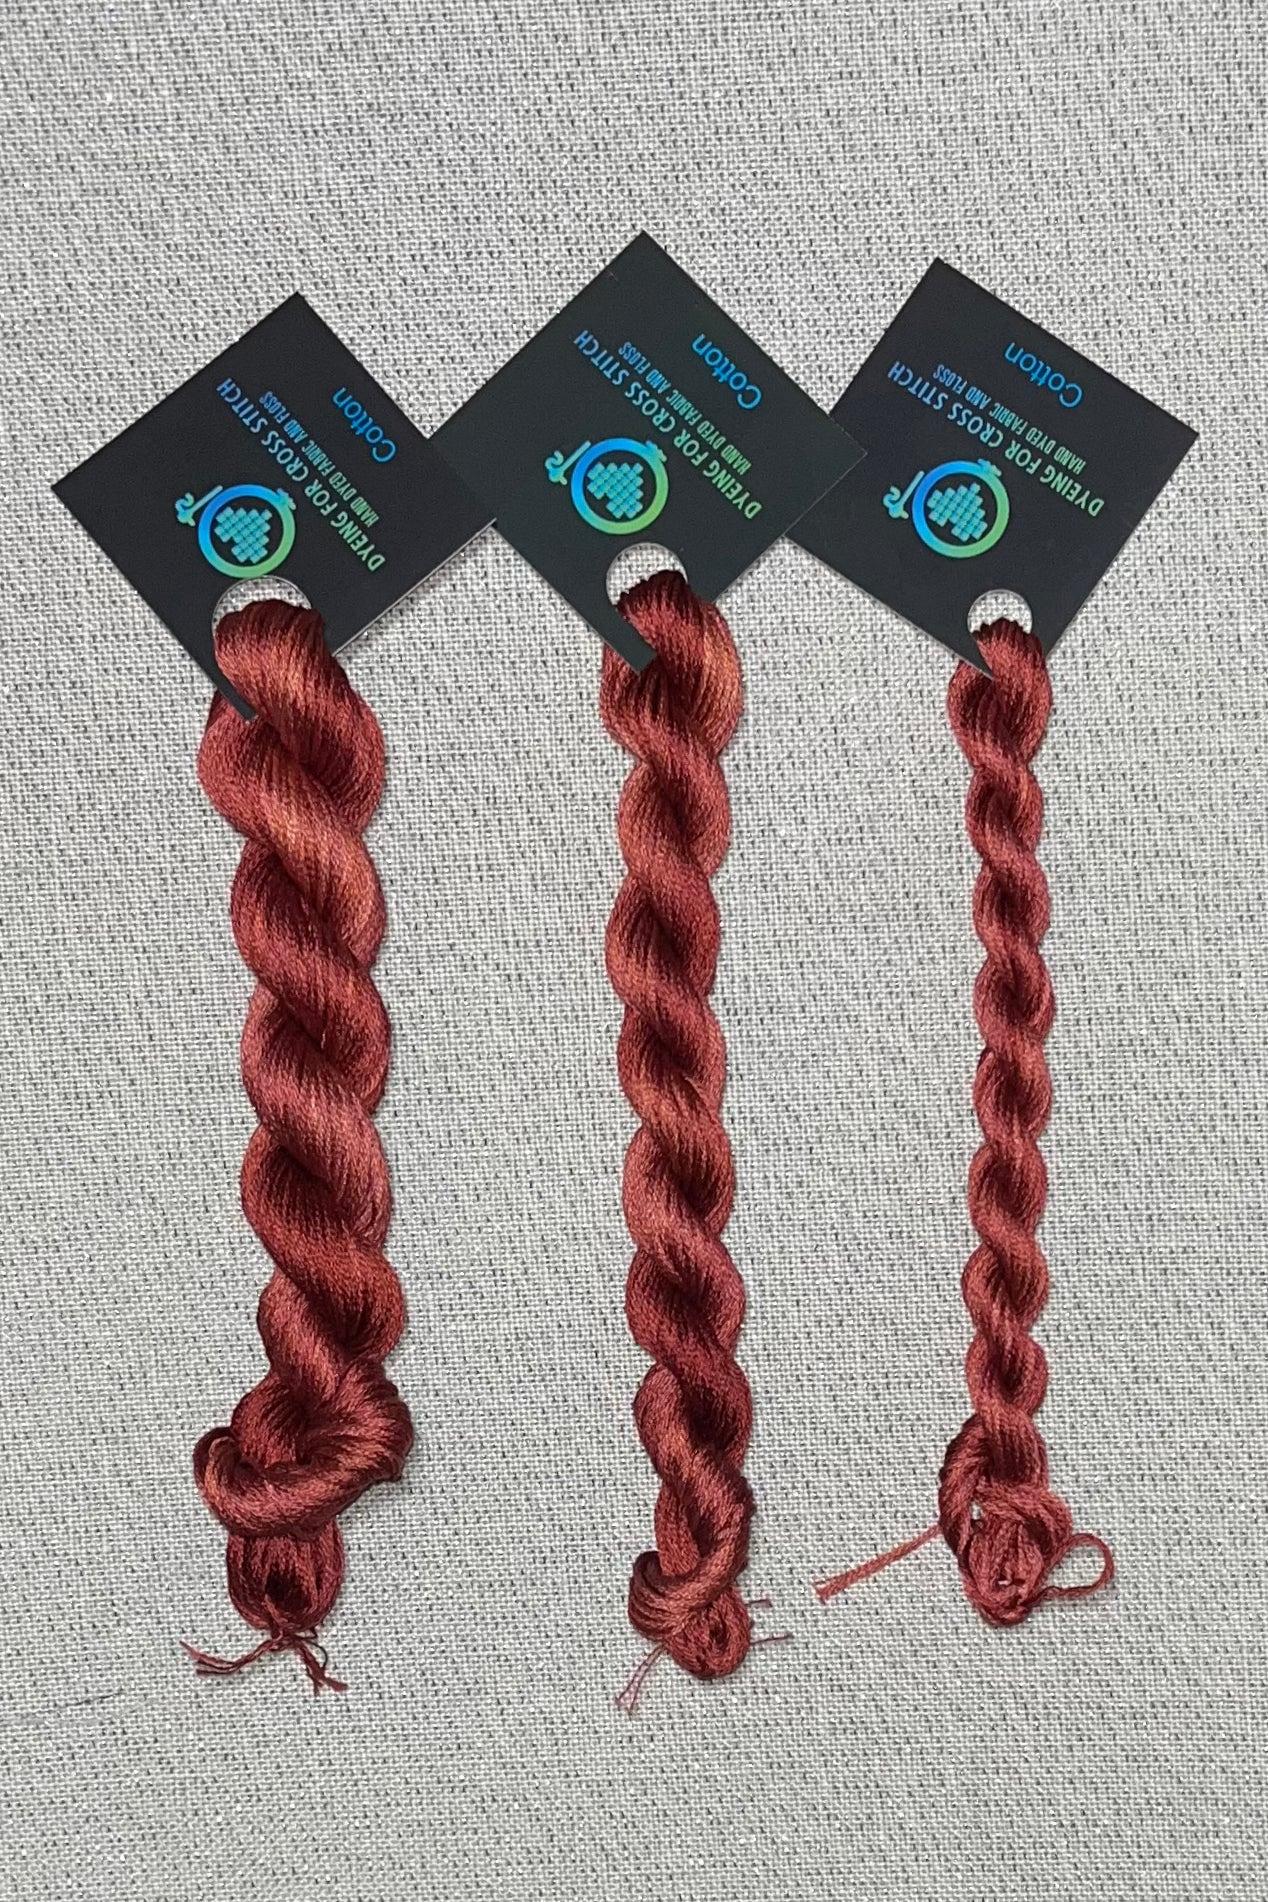 Cotton hand dyed floss - Red Barn